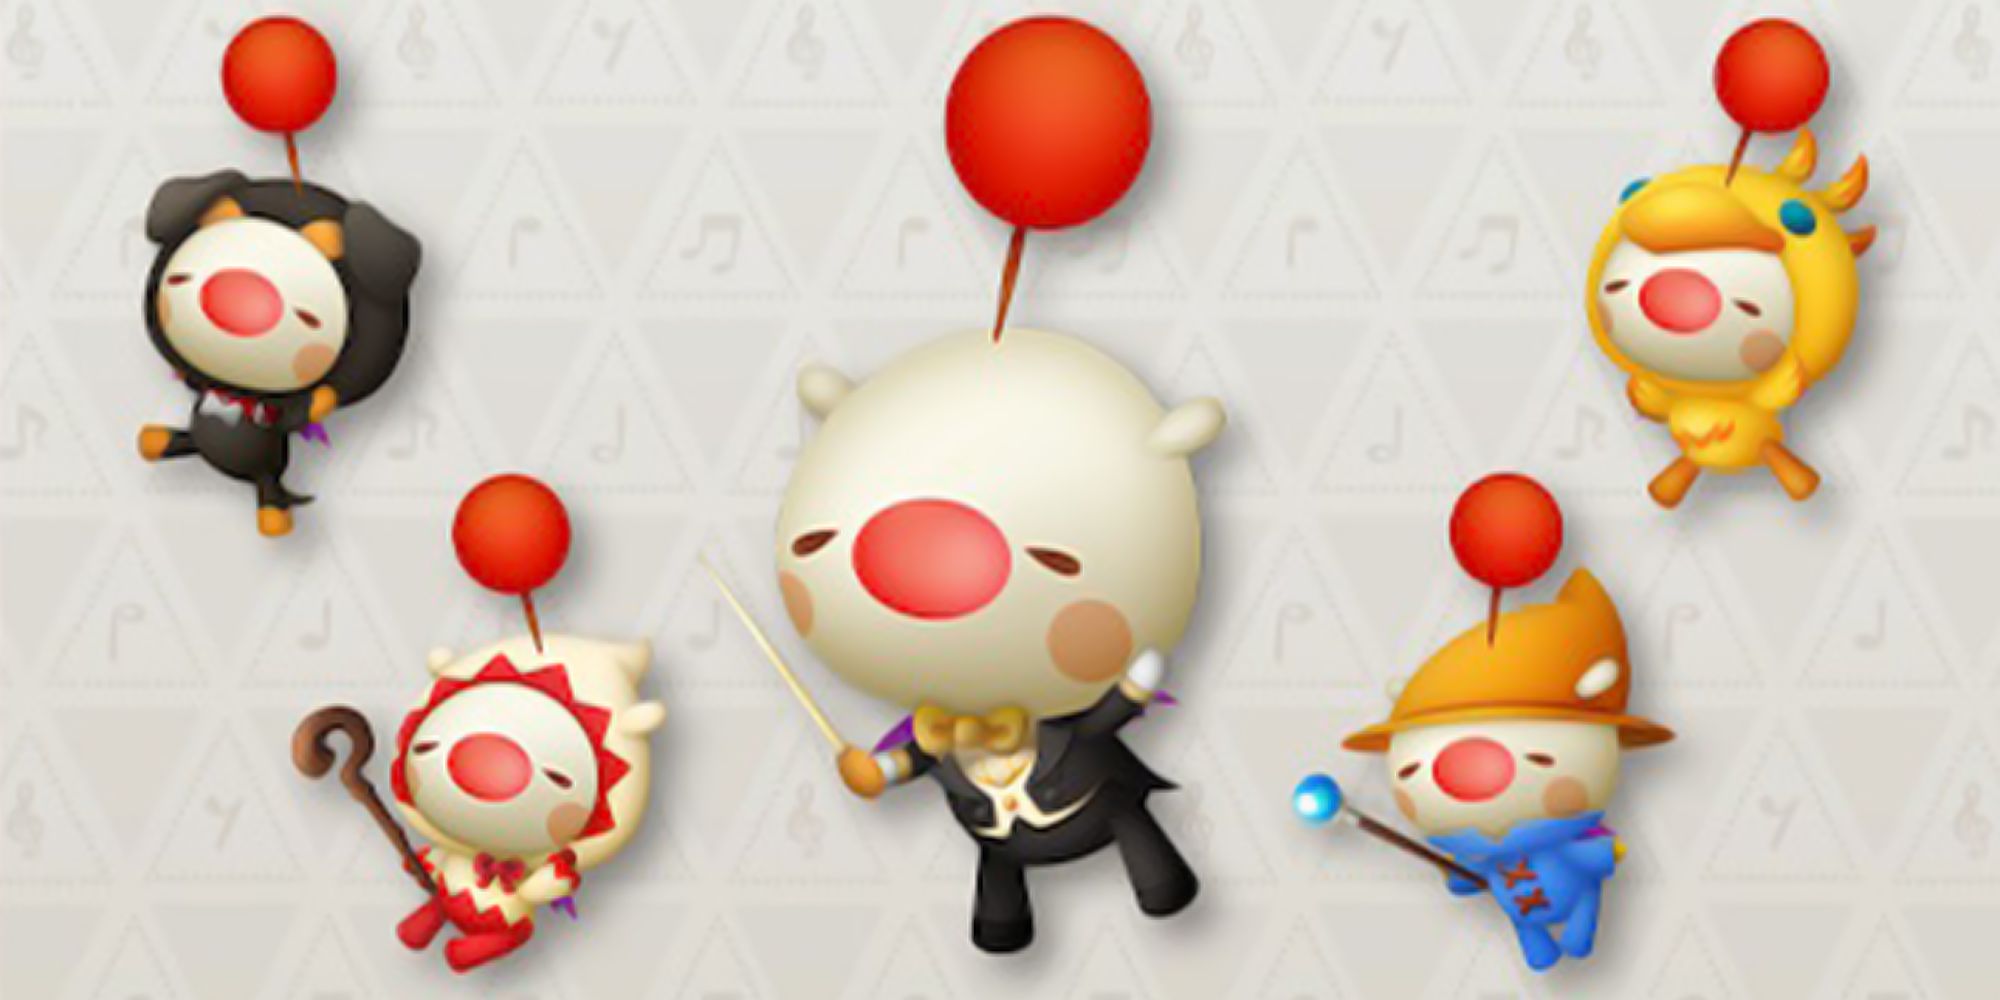 A Black Puppy moogle, White Mage moogle, Conductor moogle, Black Mage moogle, and Yellow Chocobo moogle stand against a beige background with music notes in Theatrhythm: Final Bar Line.